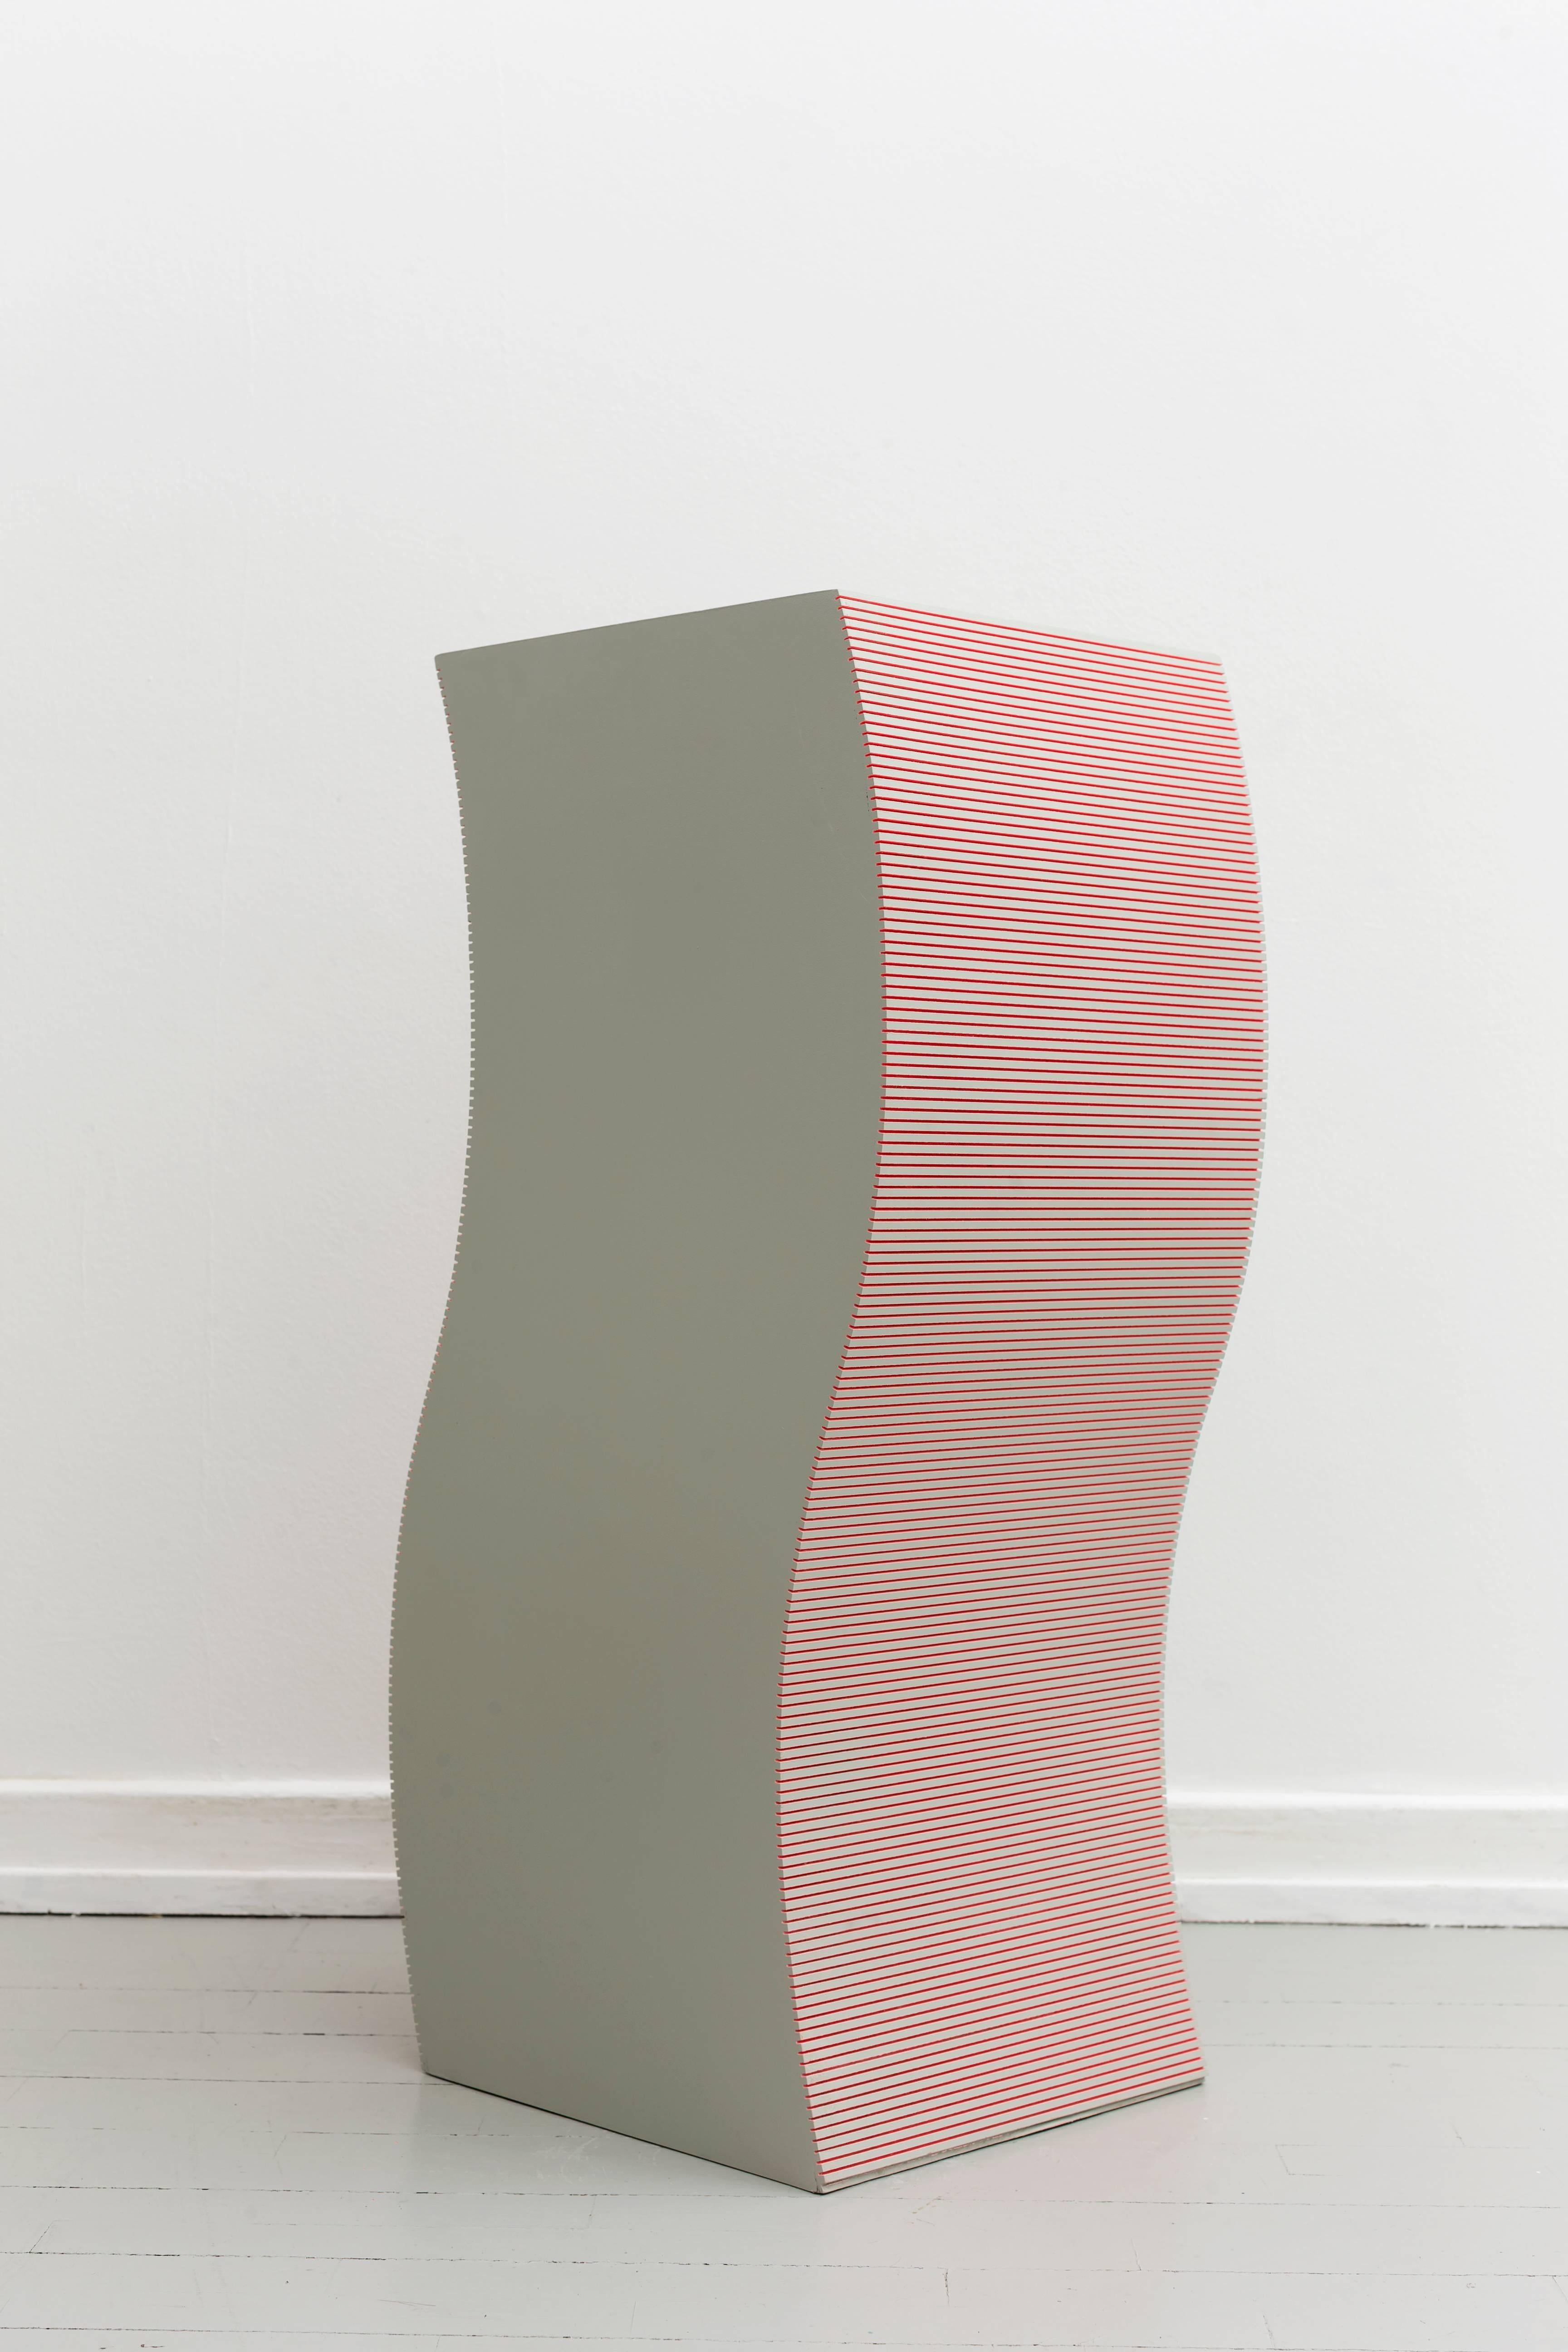 Fredrik Paulsen
Opdium
Mdf, paint
900x400x400
2016

Flexible MDF is mounted inside-out on a double curved surface. This reveals the material's milled groves creating a vibrating pattern.